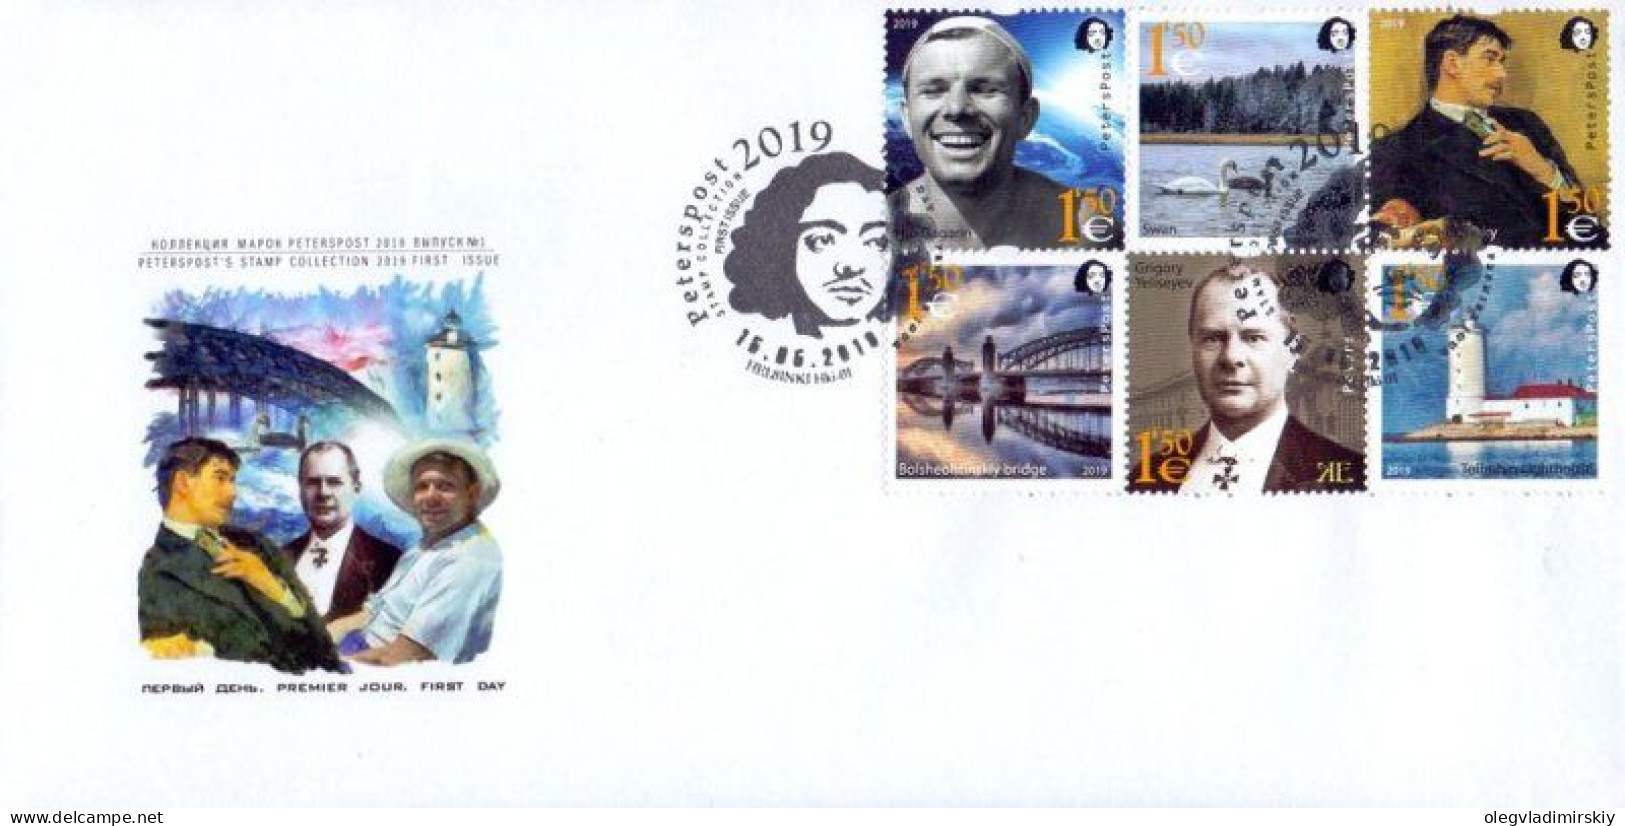 Finland 2019 Lighthouse Space Gagarin Europa CEPT Swan Etc Peterspost Stamp Set Of 6 Stamps In Block FDC - 2019